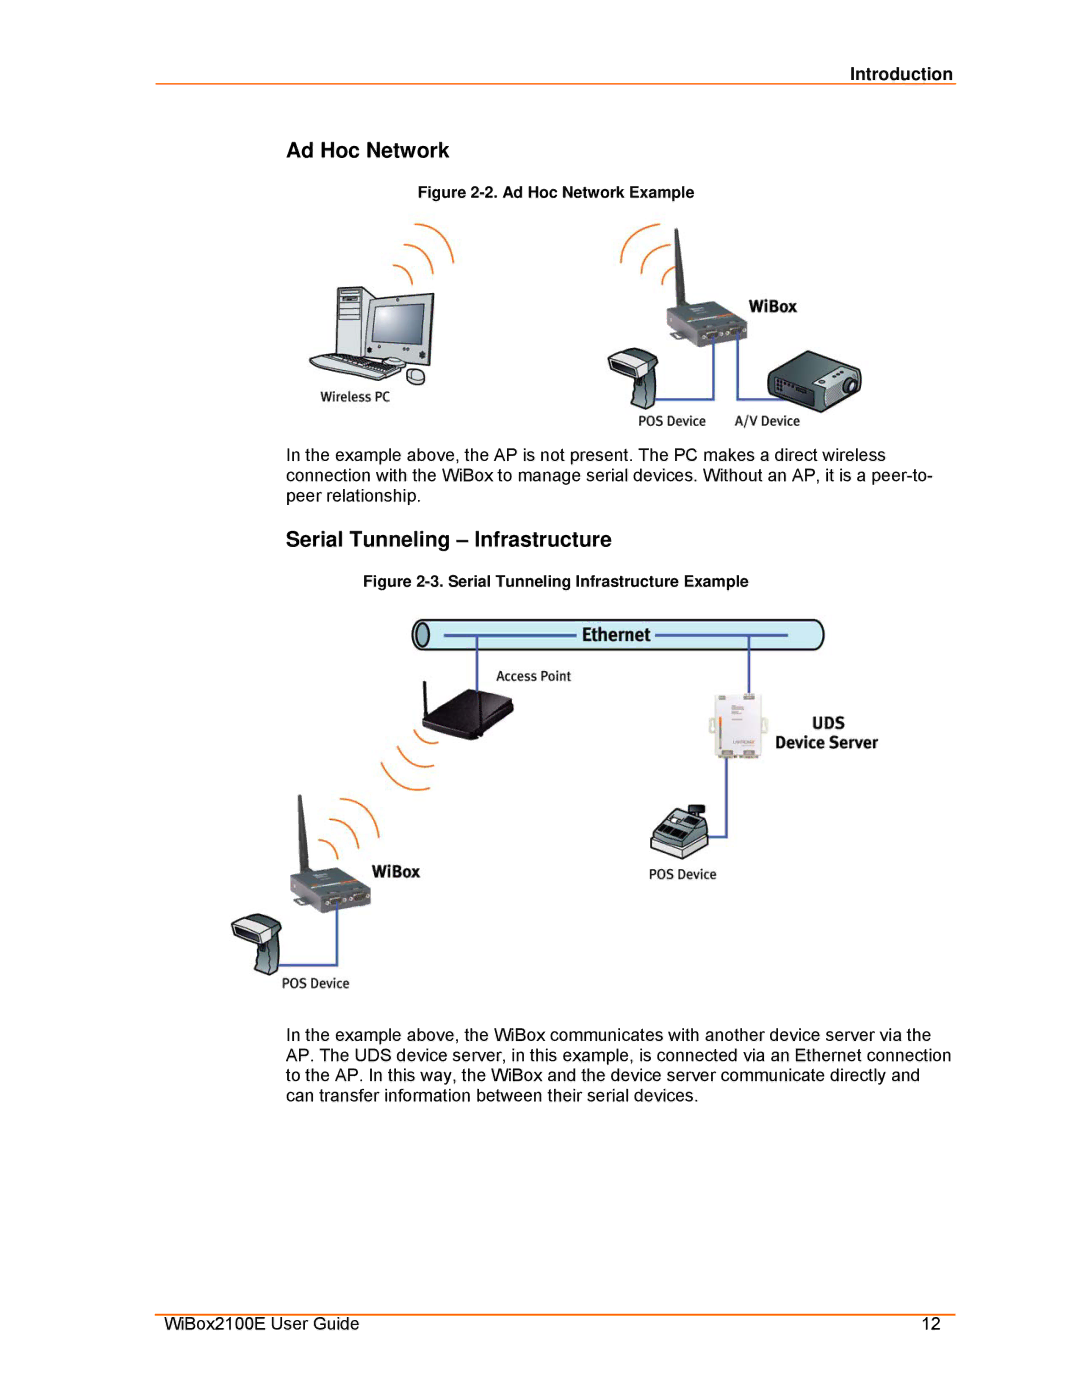 Lantronix Ethernet manual Ad Hoc Network, Serial Tunneling Infrastructure 